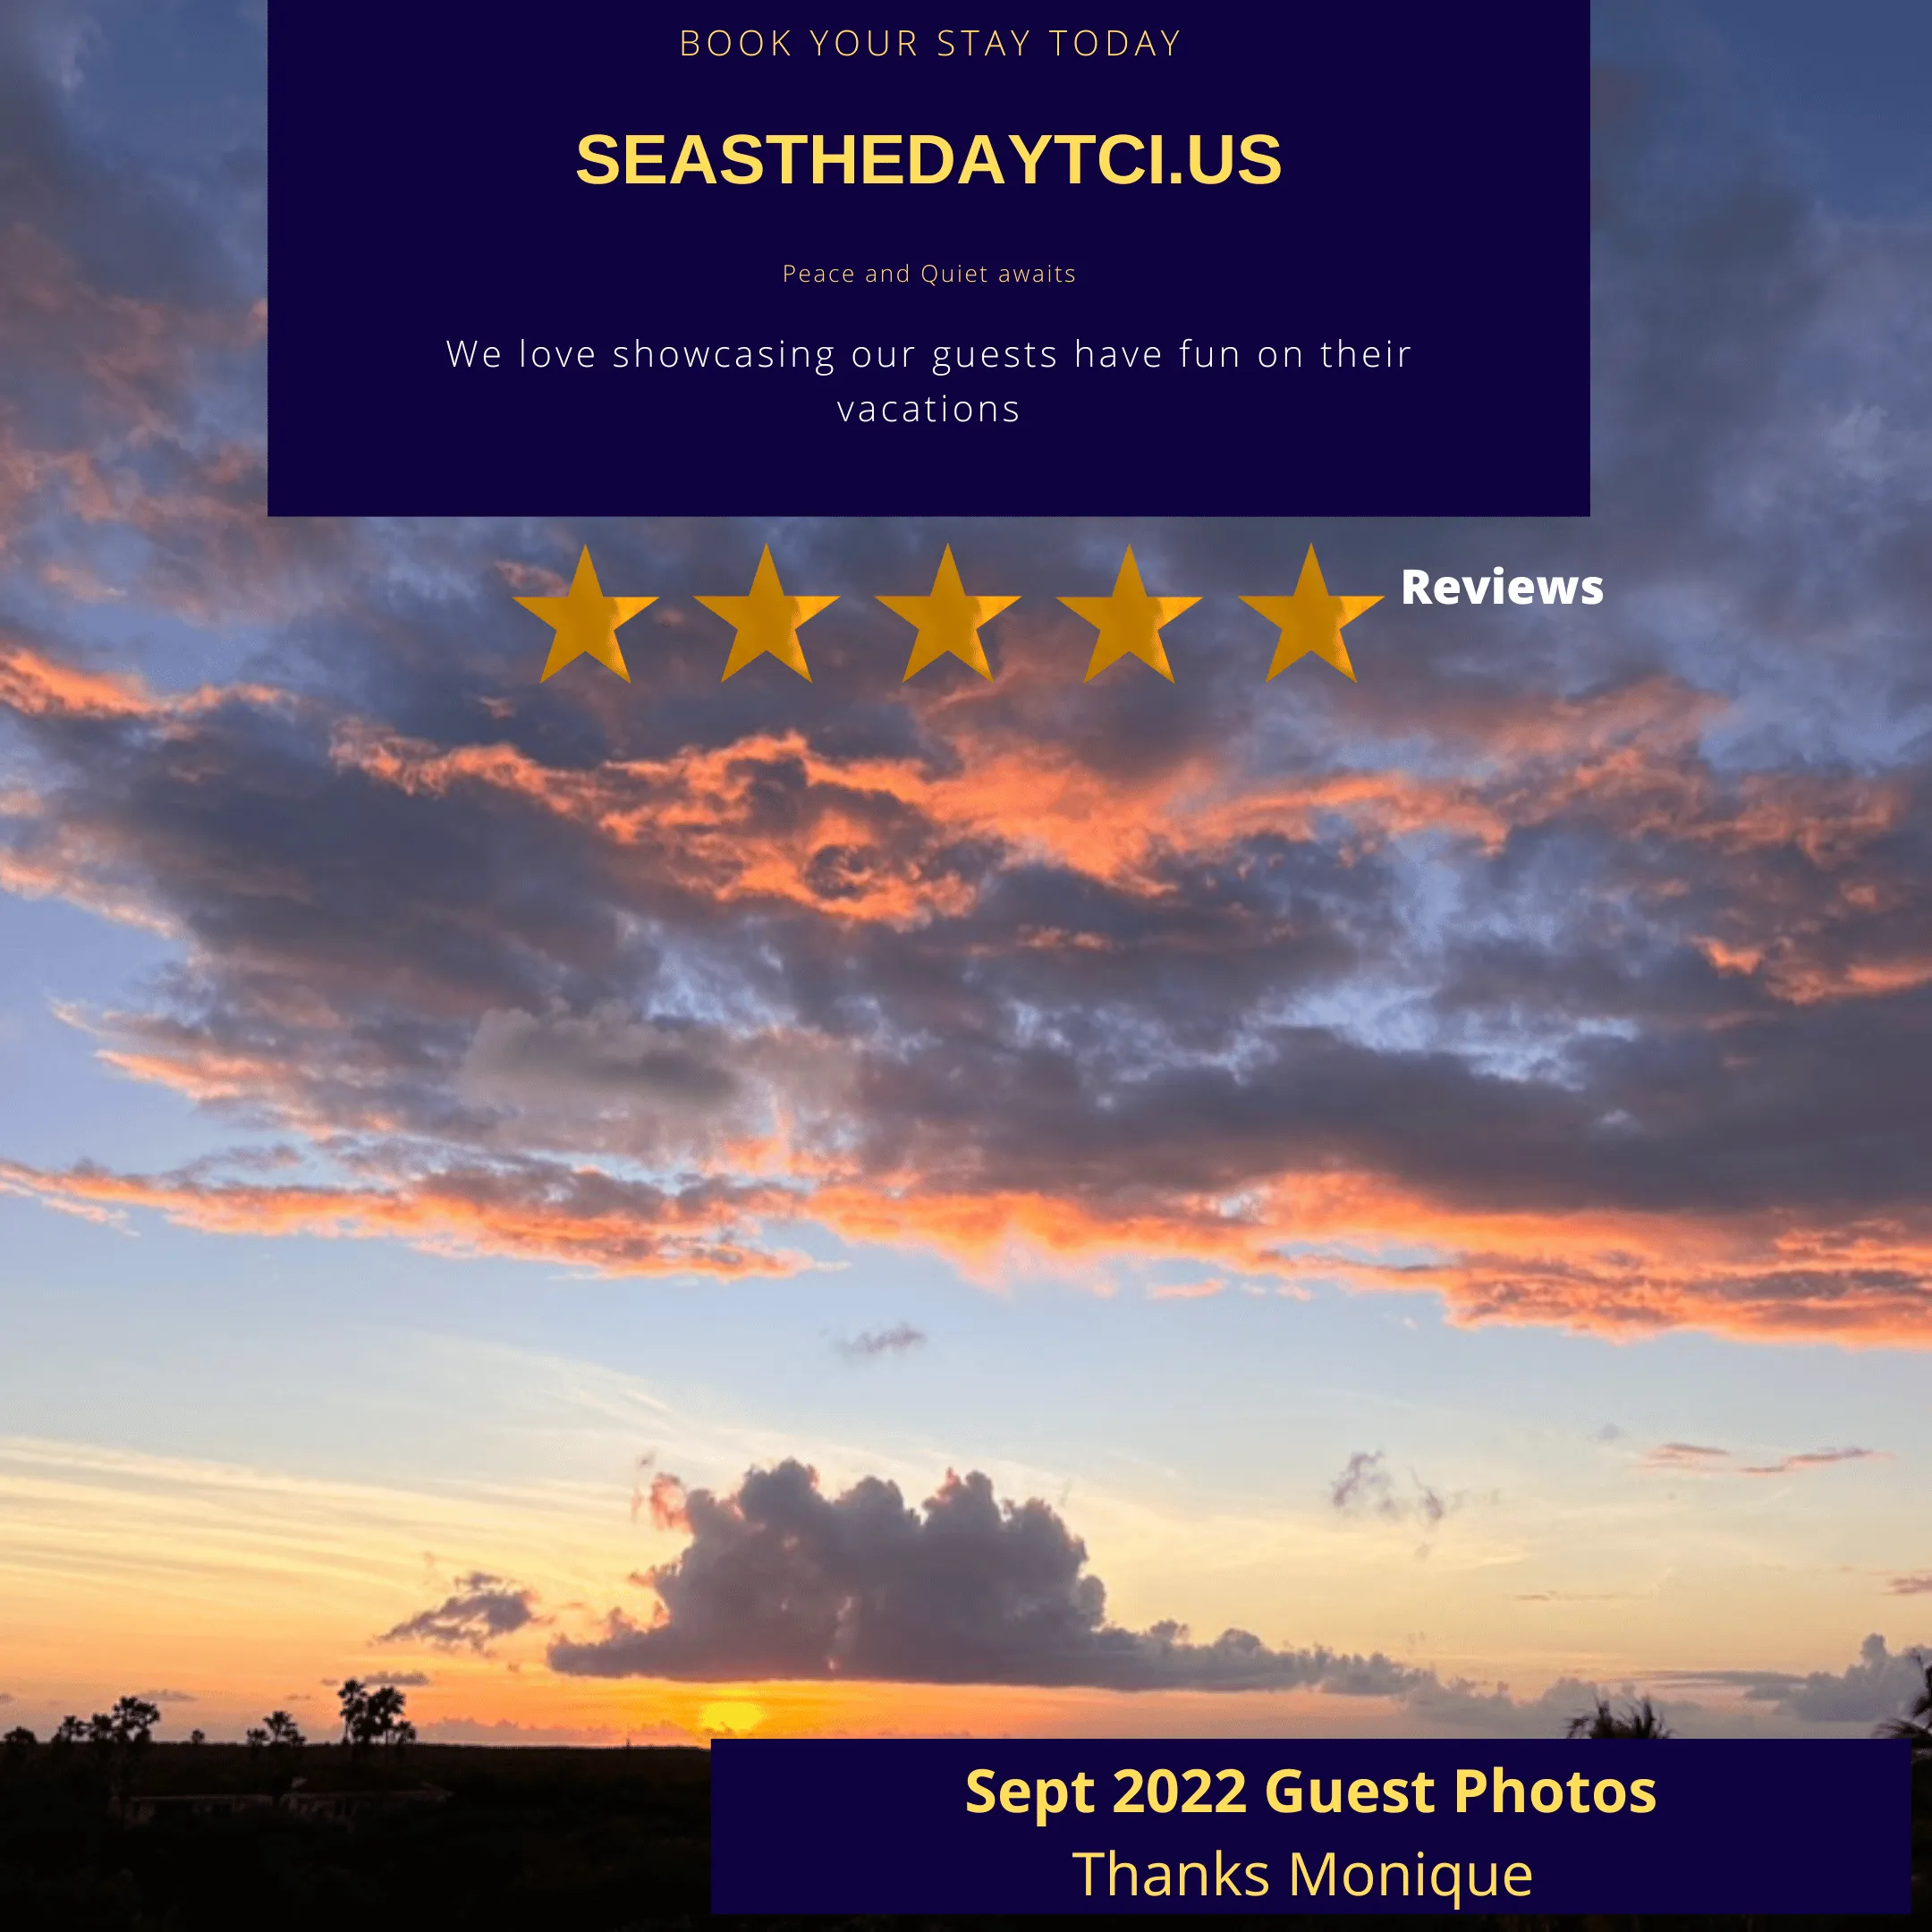 Seas The Day TCI - reviews